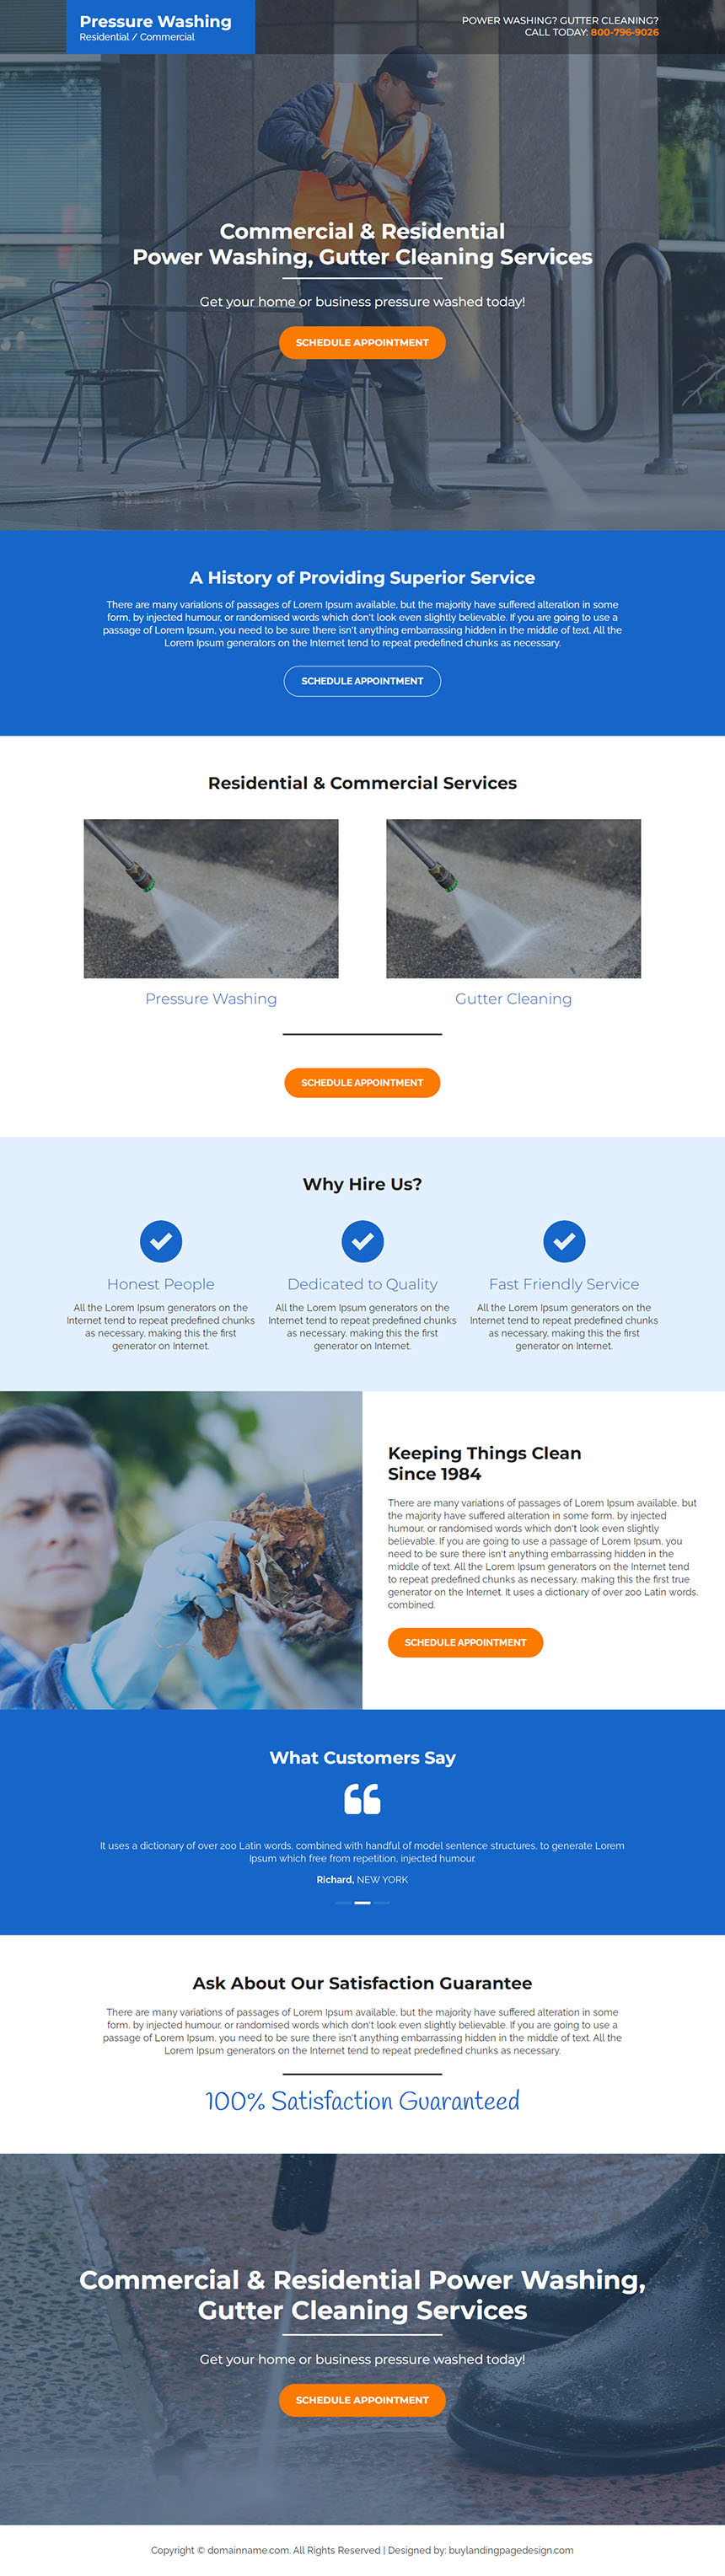 gutter and pressure cleaning service responsive landing page